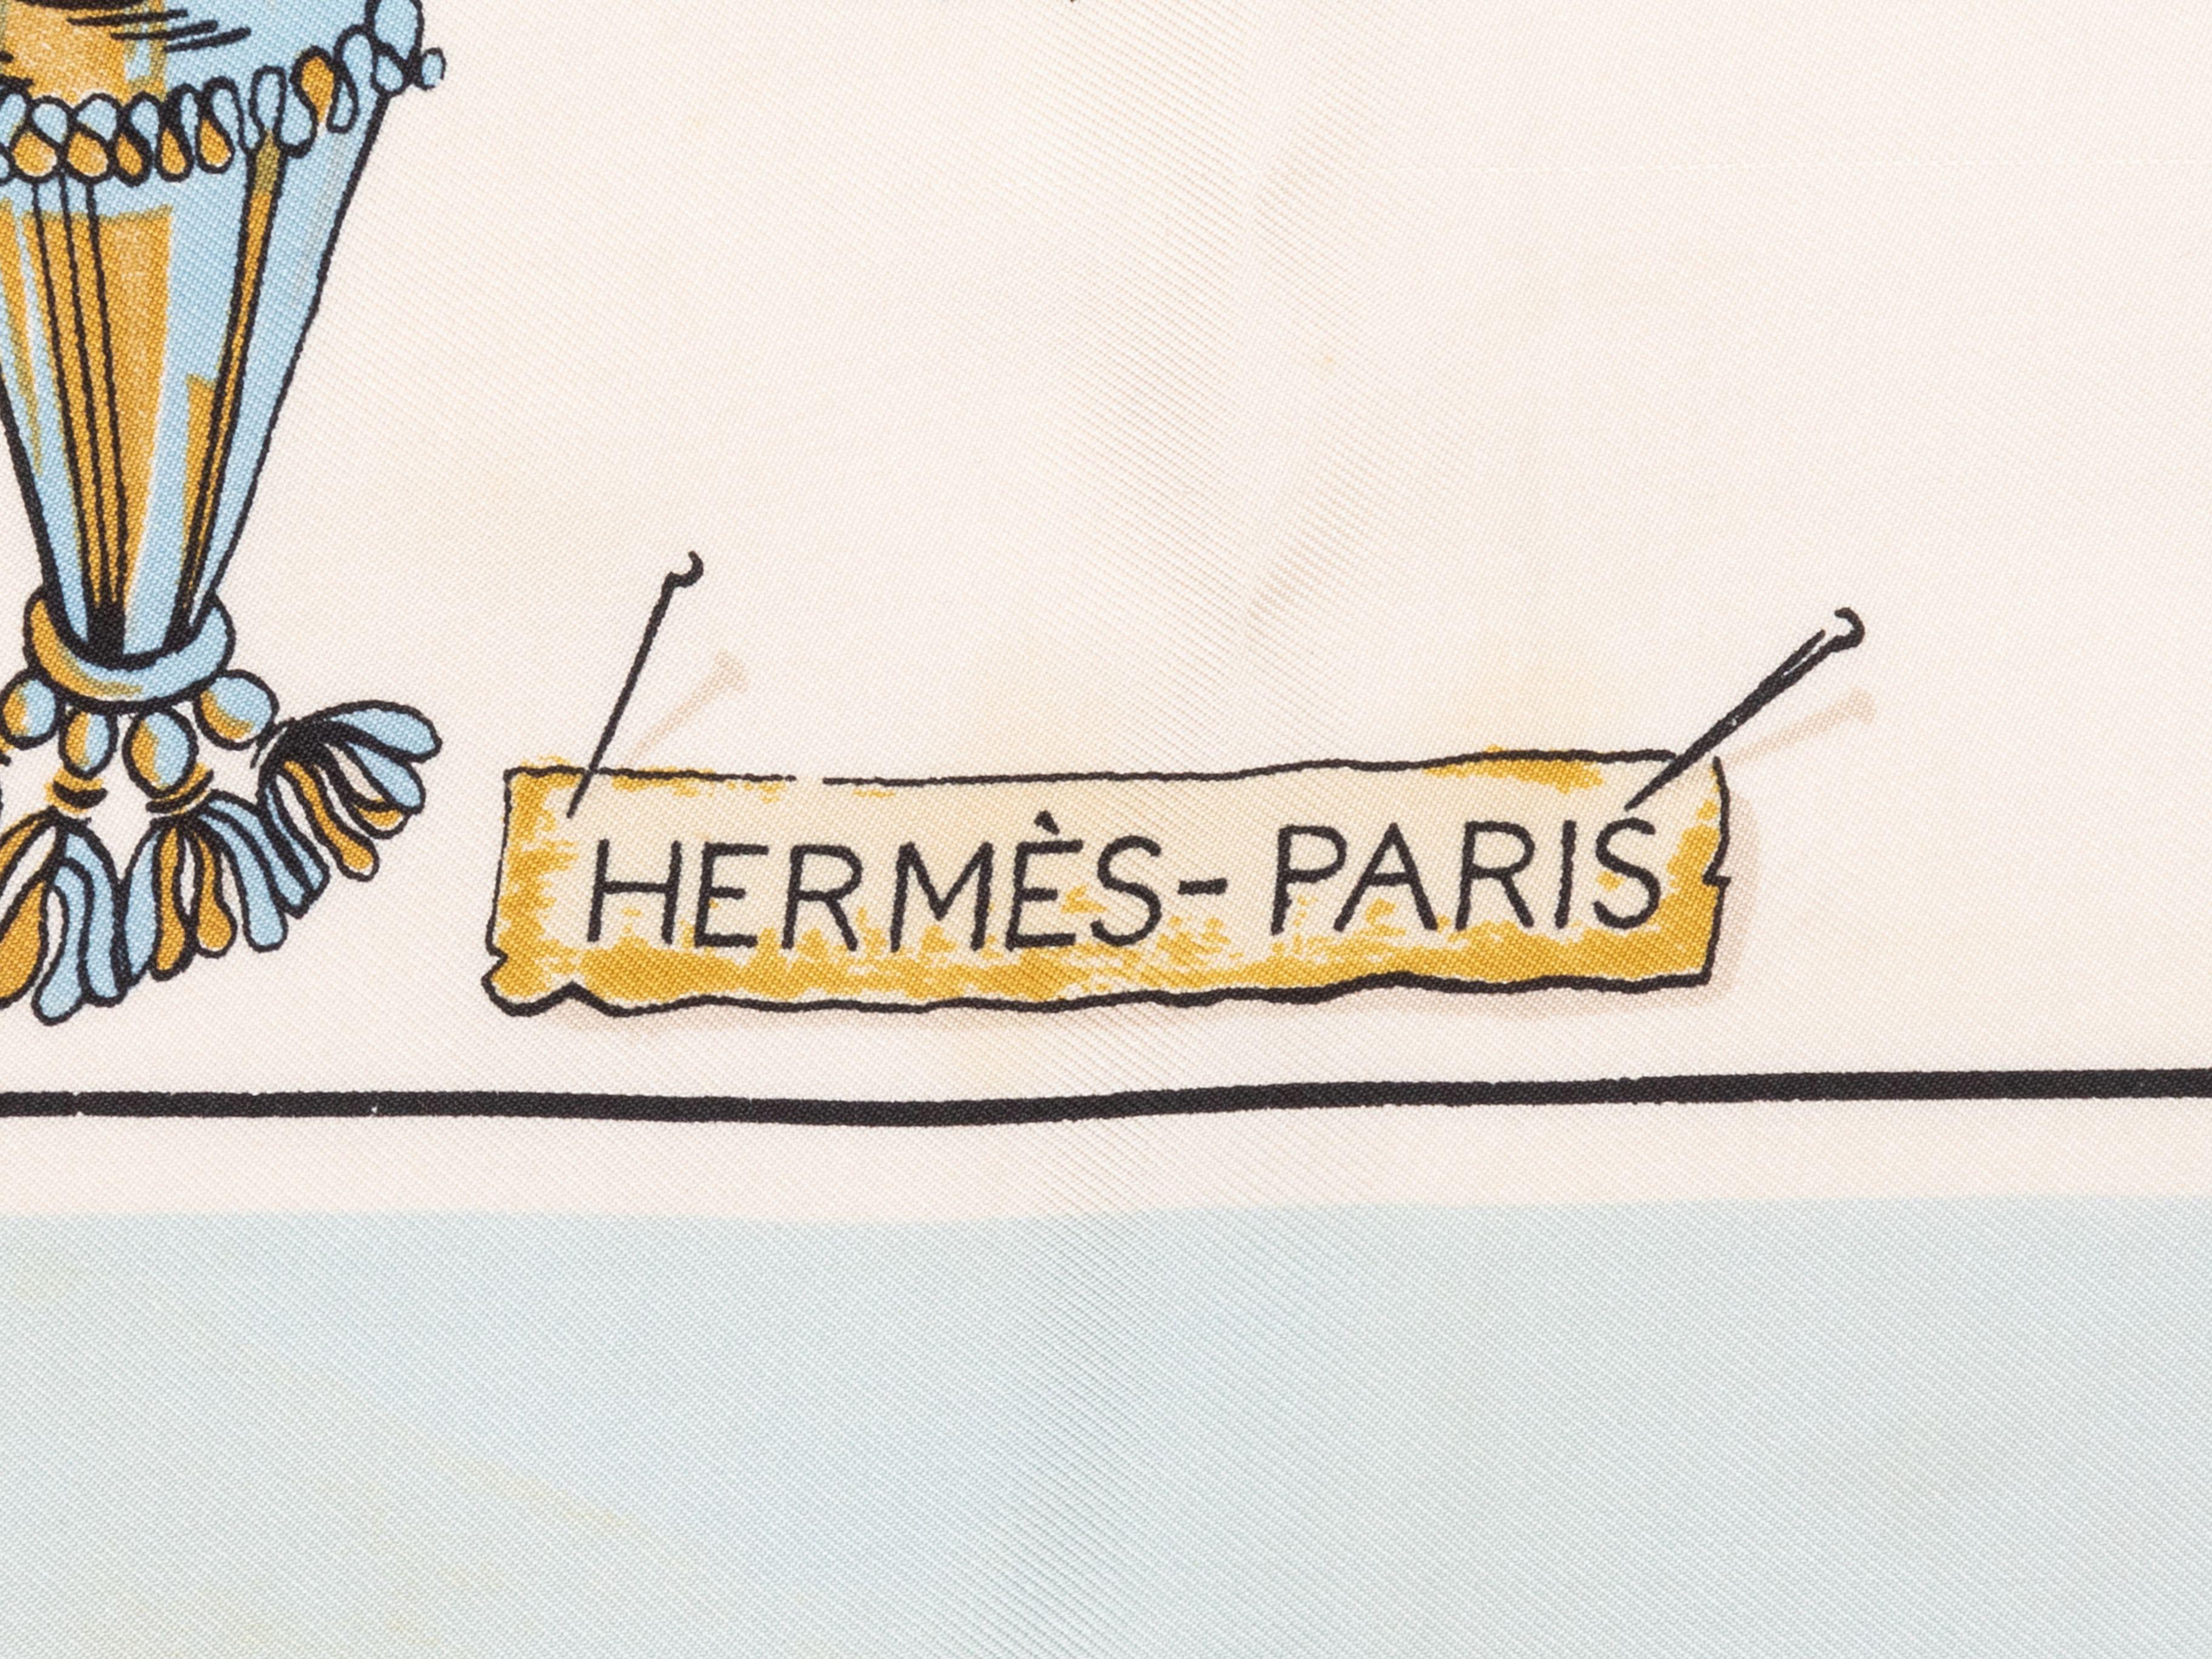 Product Details: Light blue and multicolor Passementerie printed silk scarf by Hermes. 34